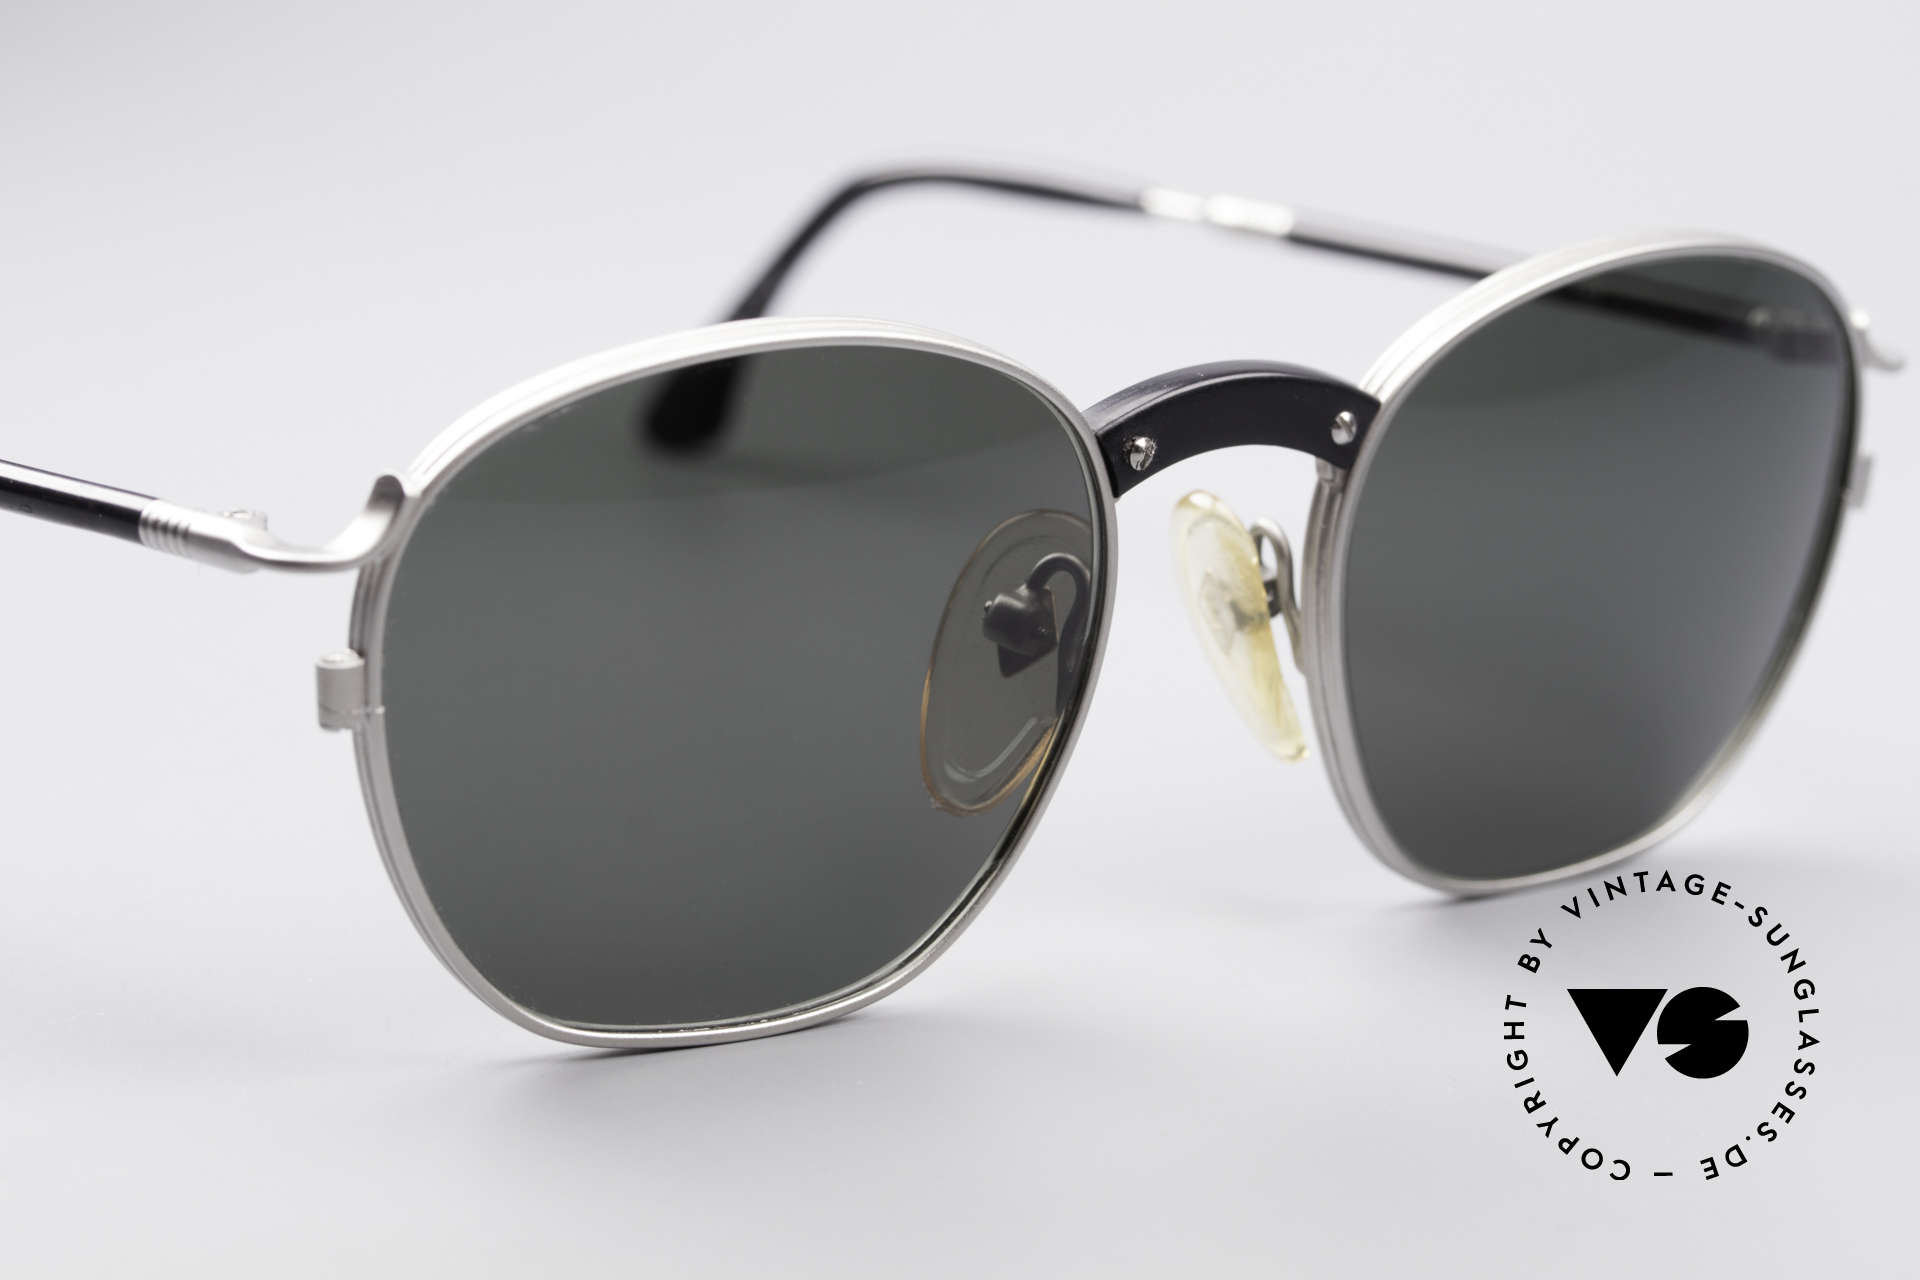 Jean Paul Gaultier 55-1271 Rare Vintage Sunglasses, unused (like all our Haute Couture J.P.G. sunglasses), Made for Men and Women